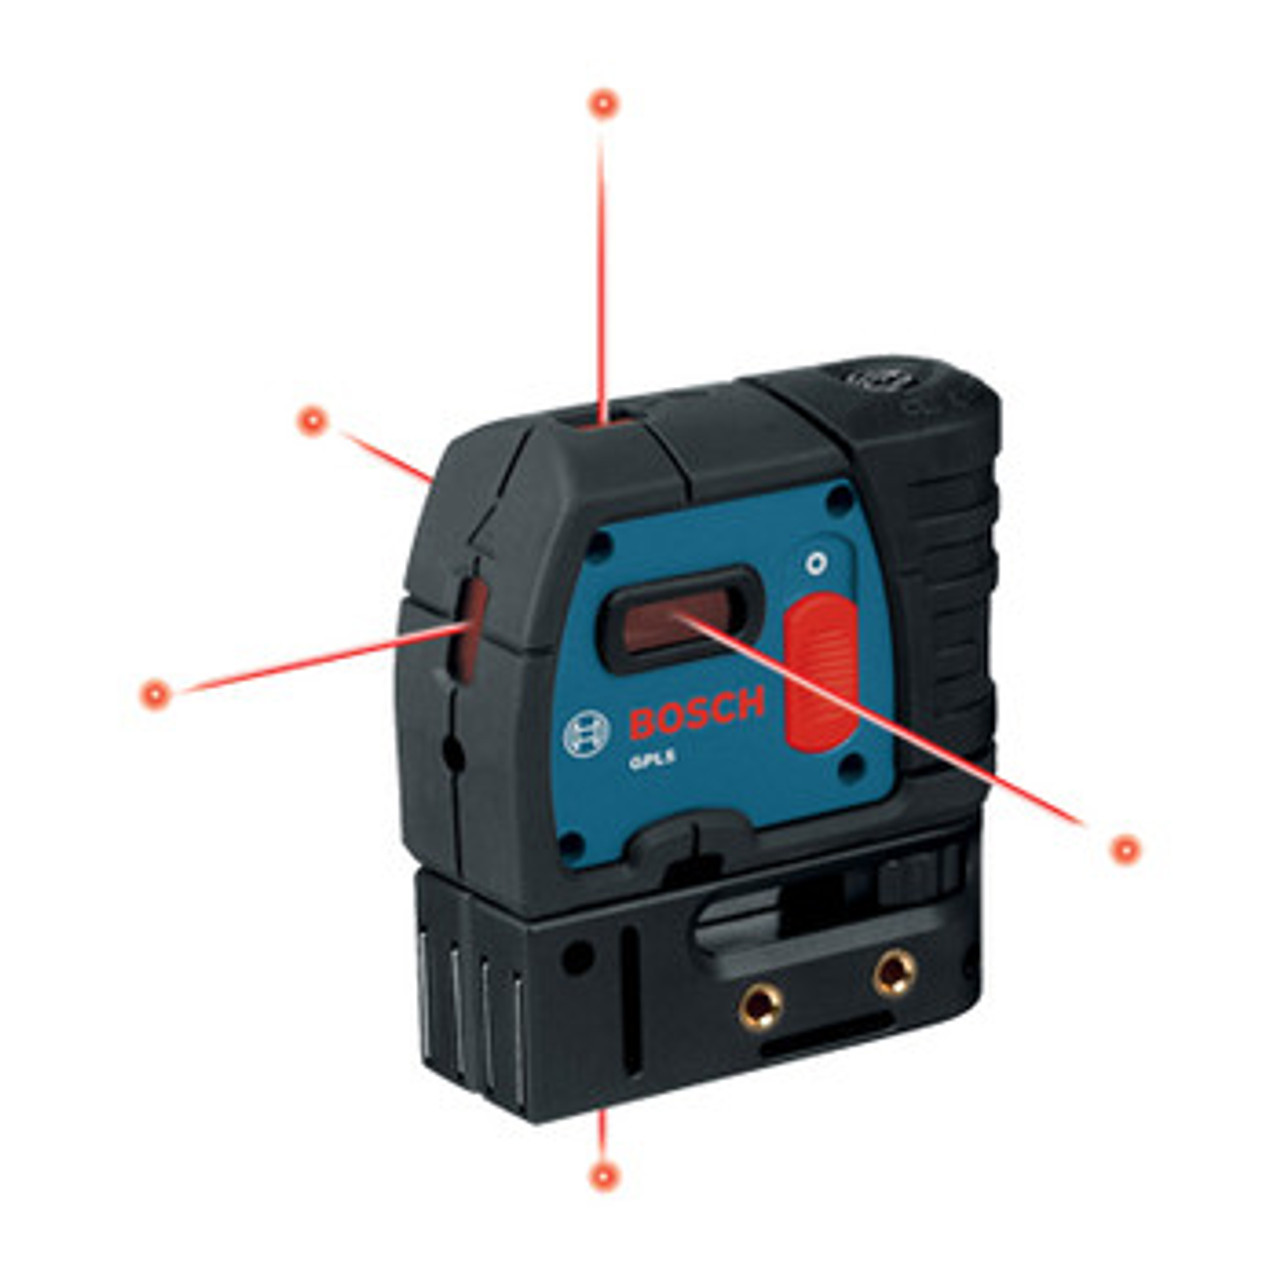 Bosch GPL5 Five Point Self-Leveling Alignment Laser for sale online 